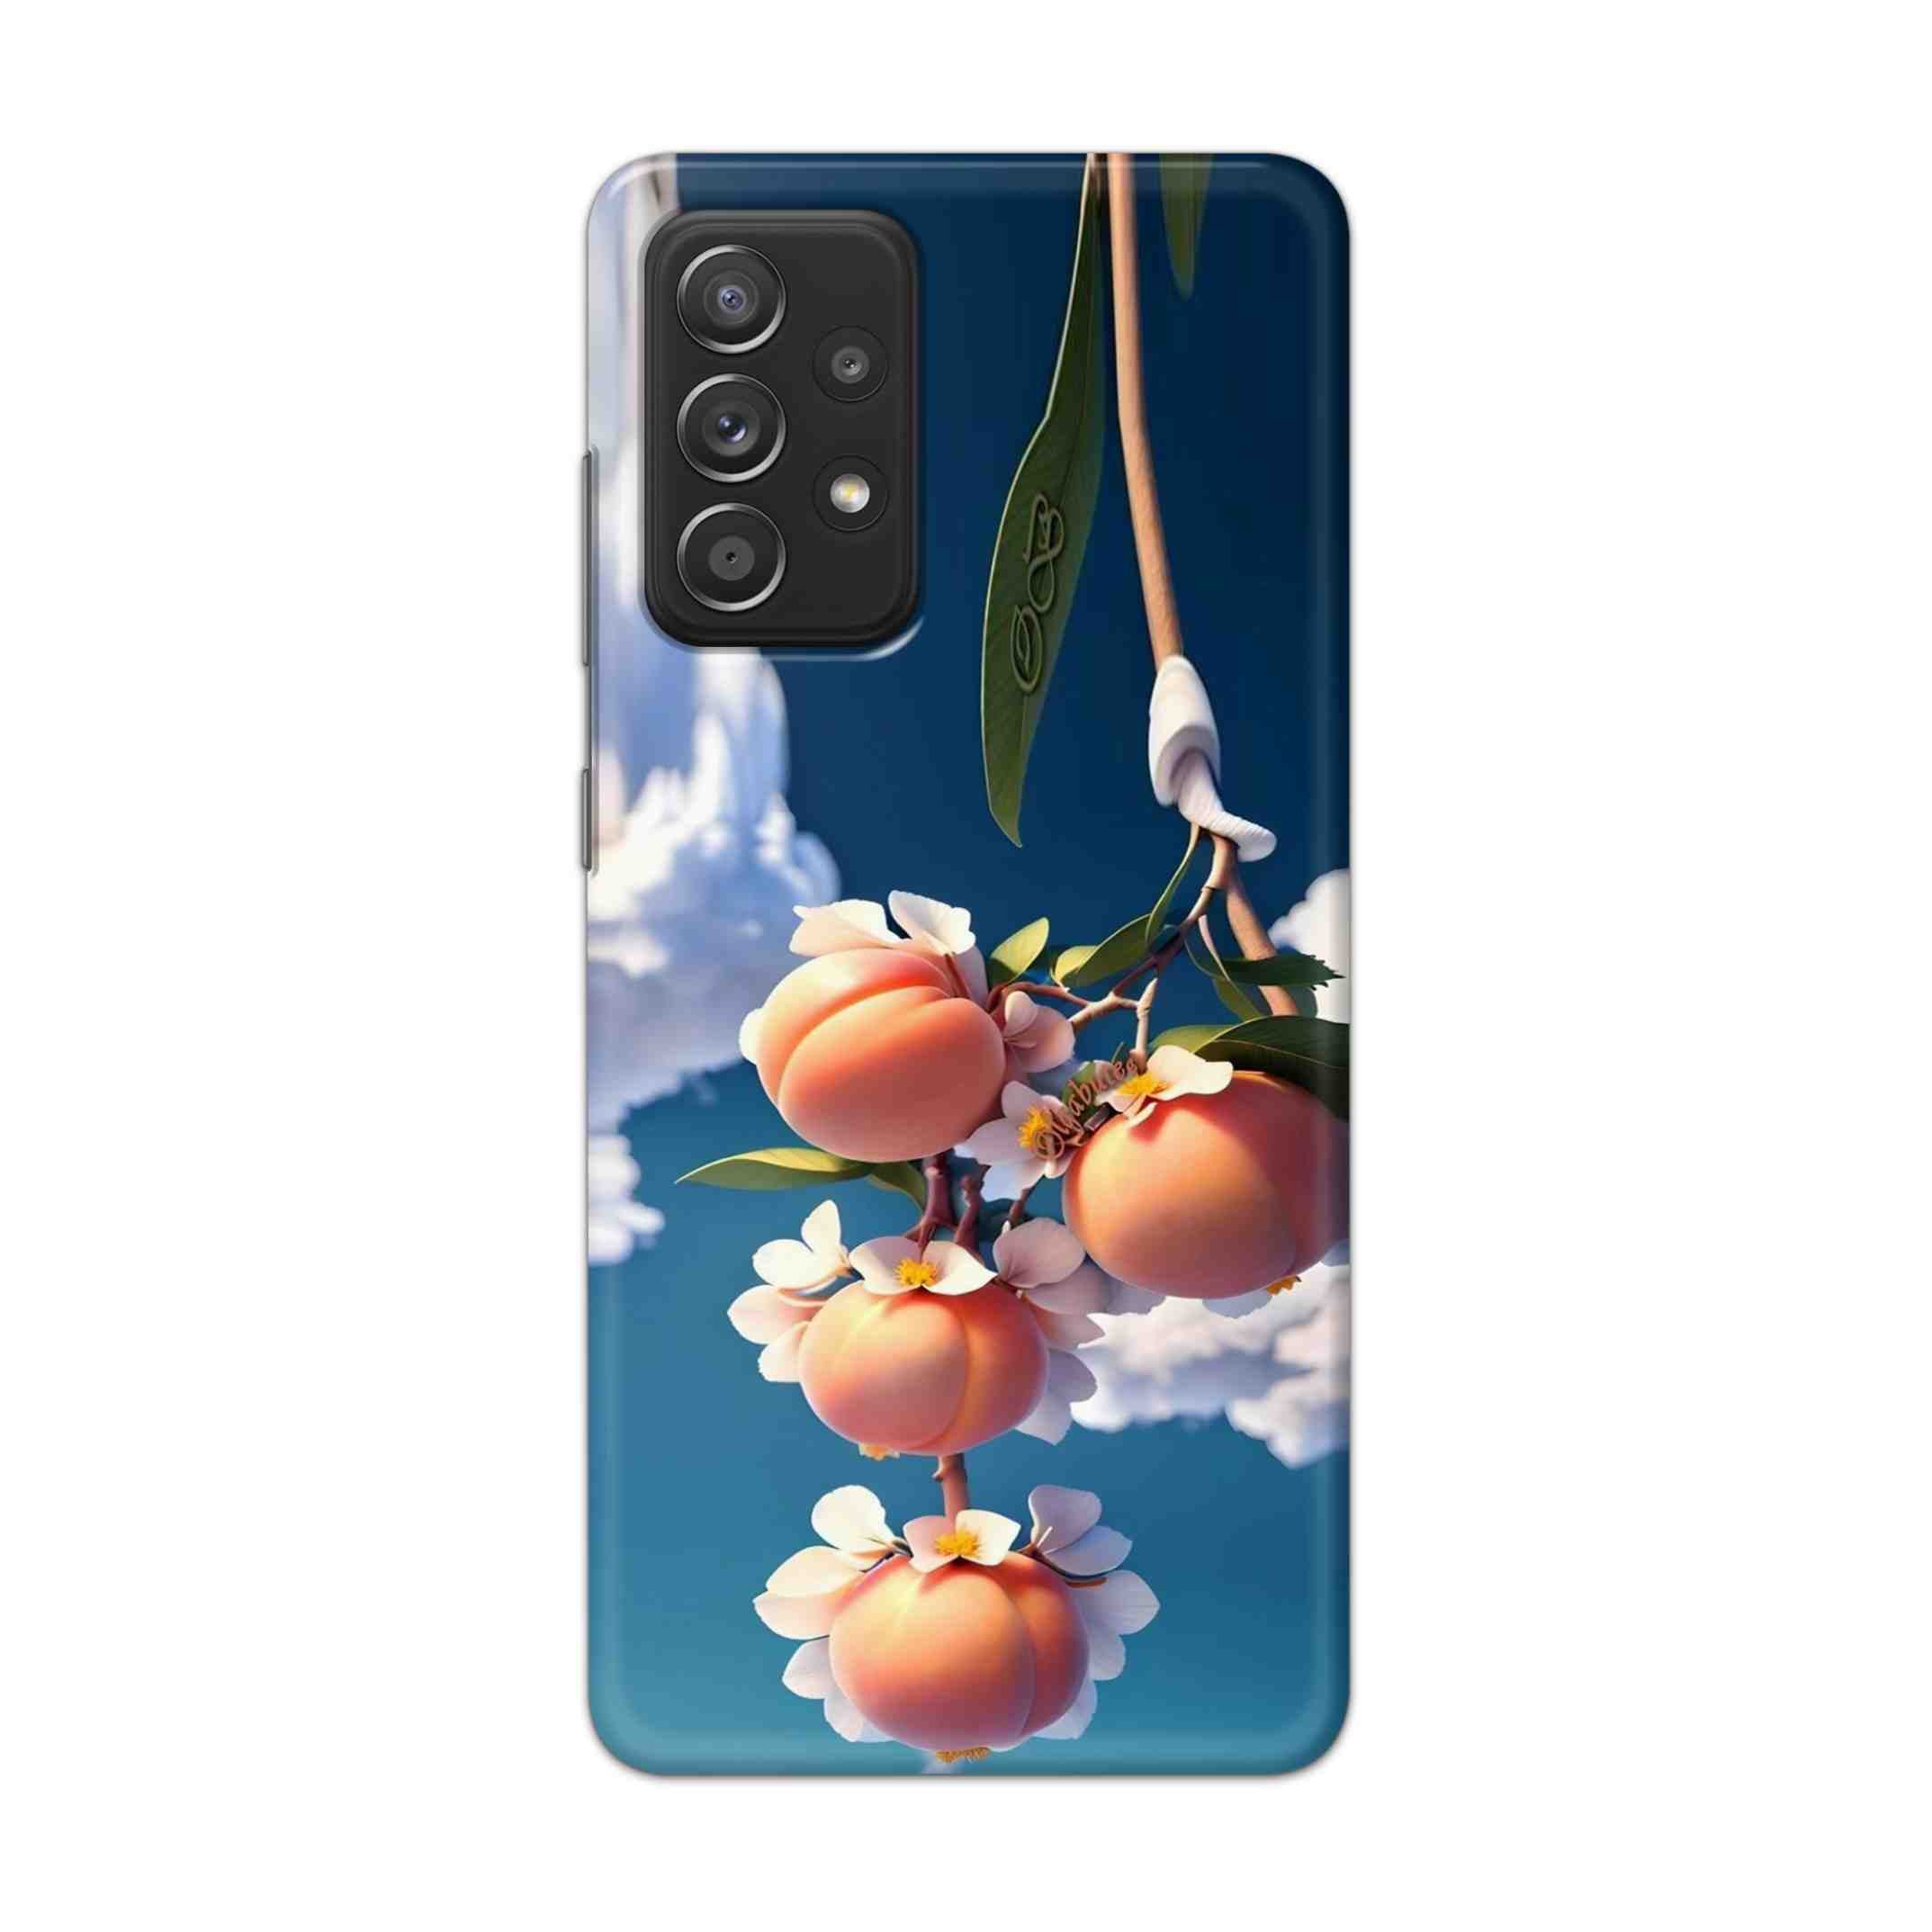 Buy Fruit Hard Back Mobile Phone Case Cover For Samsung Galaxy A52 Online